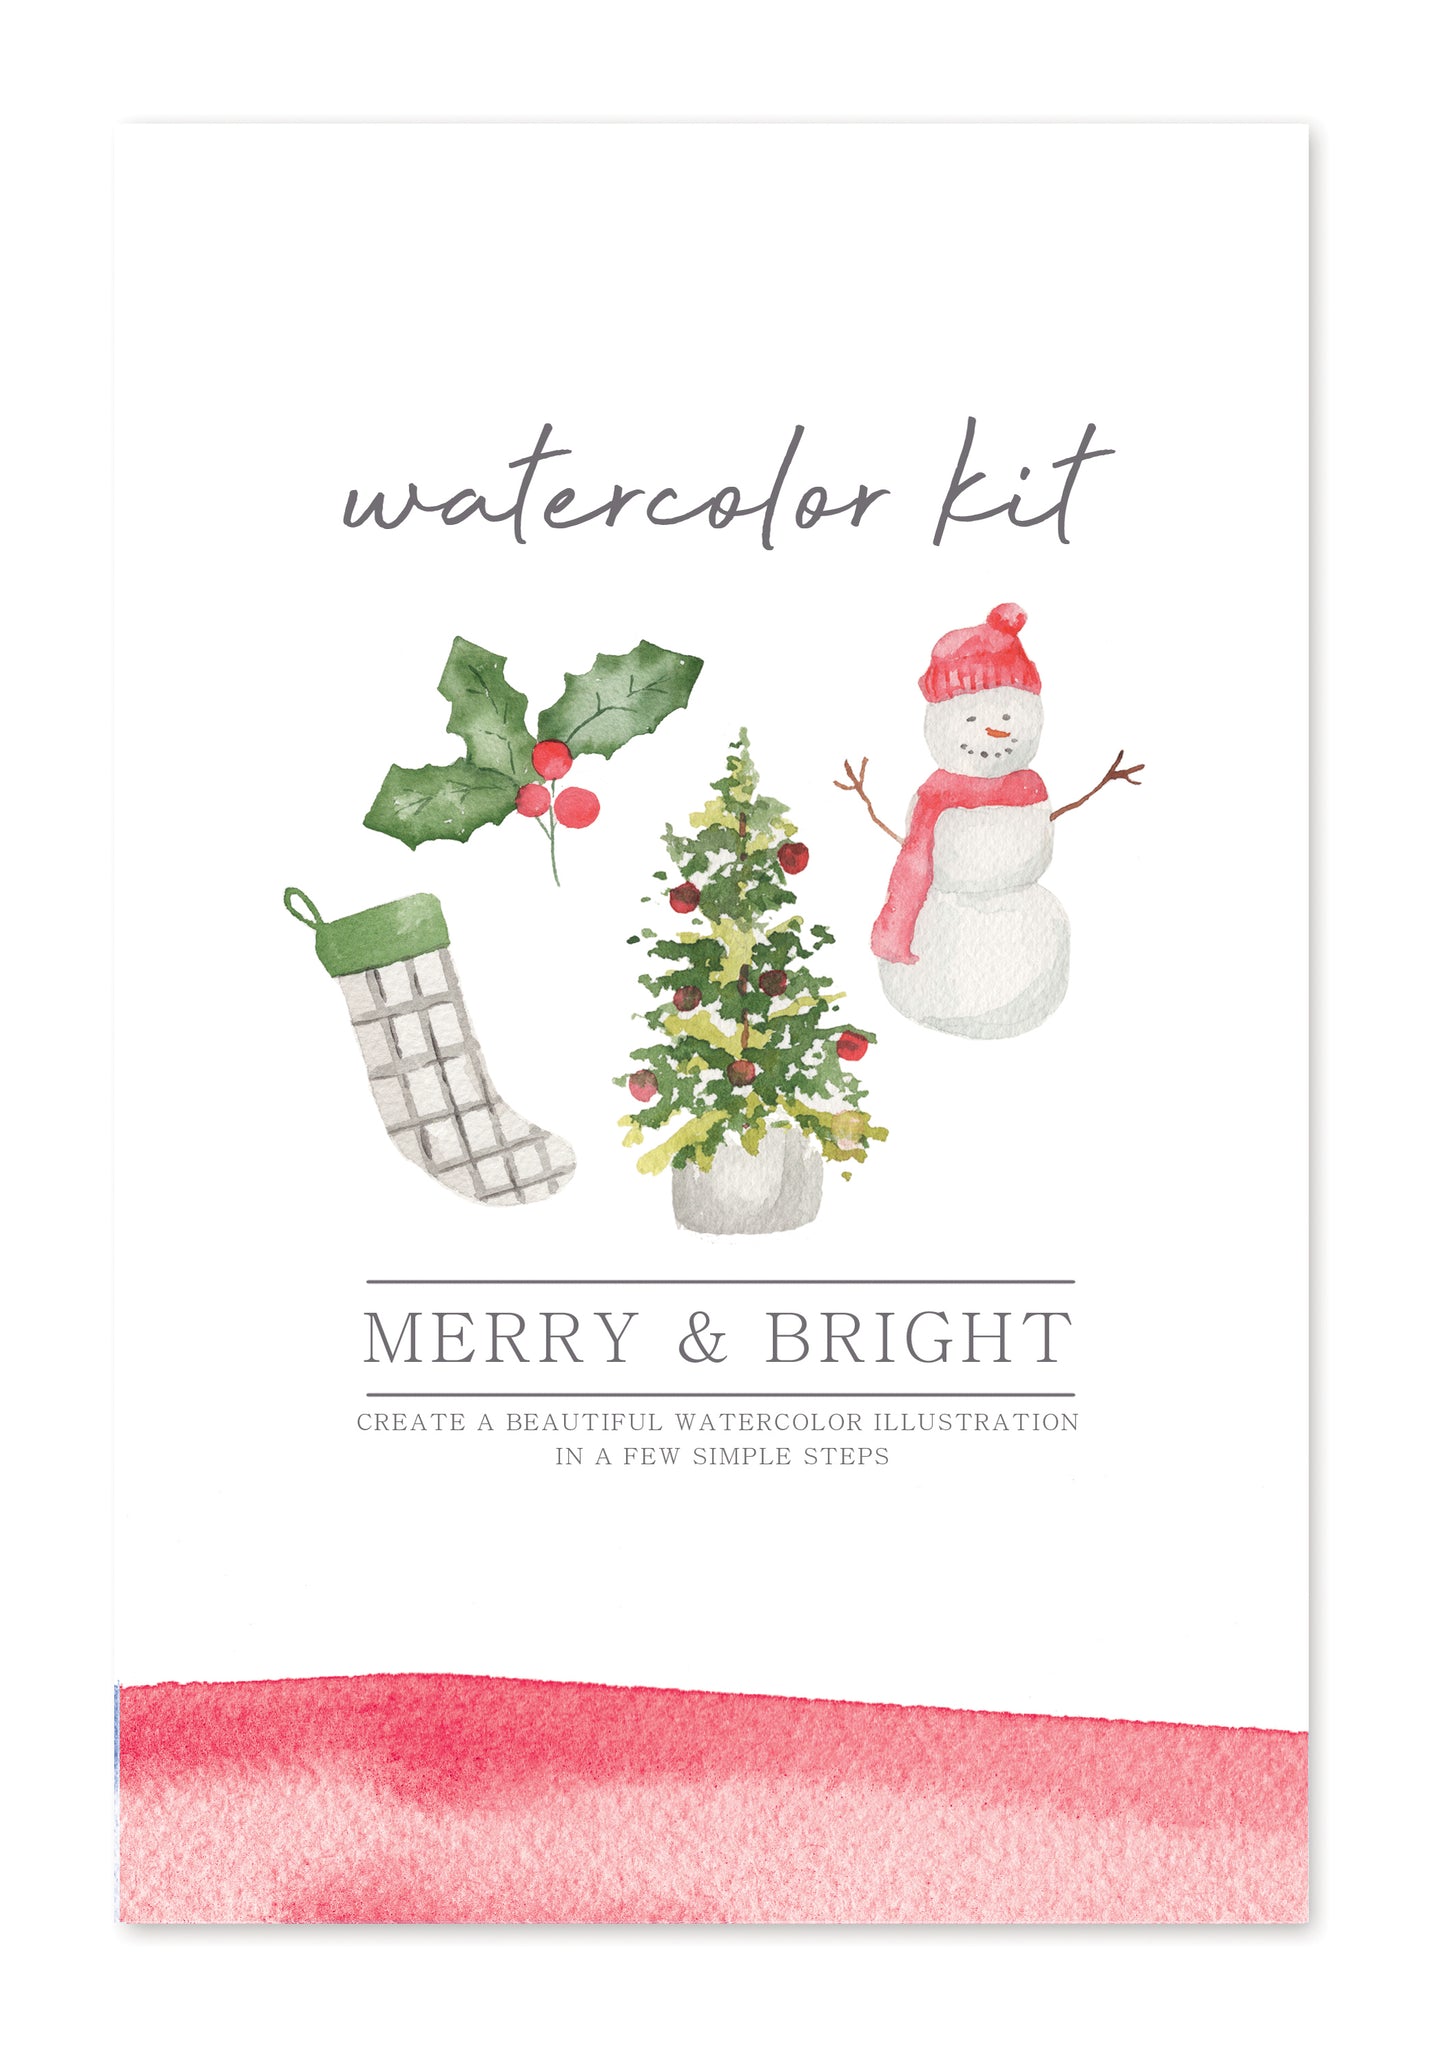 Watercolor Kit - Wildflowers – Me and Mary Shop